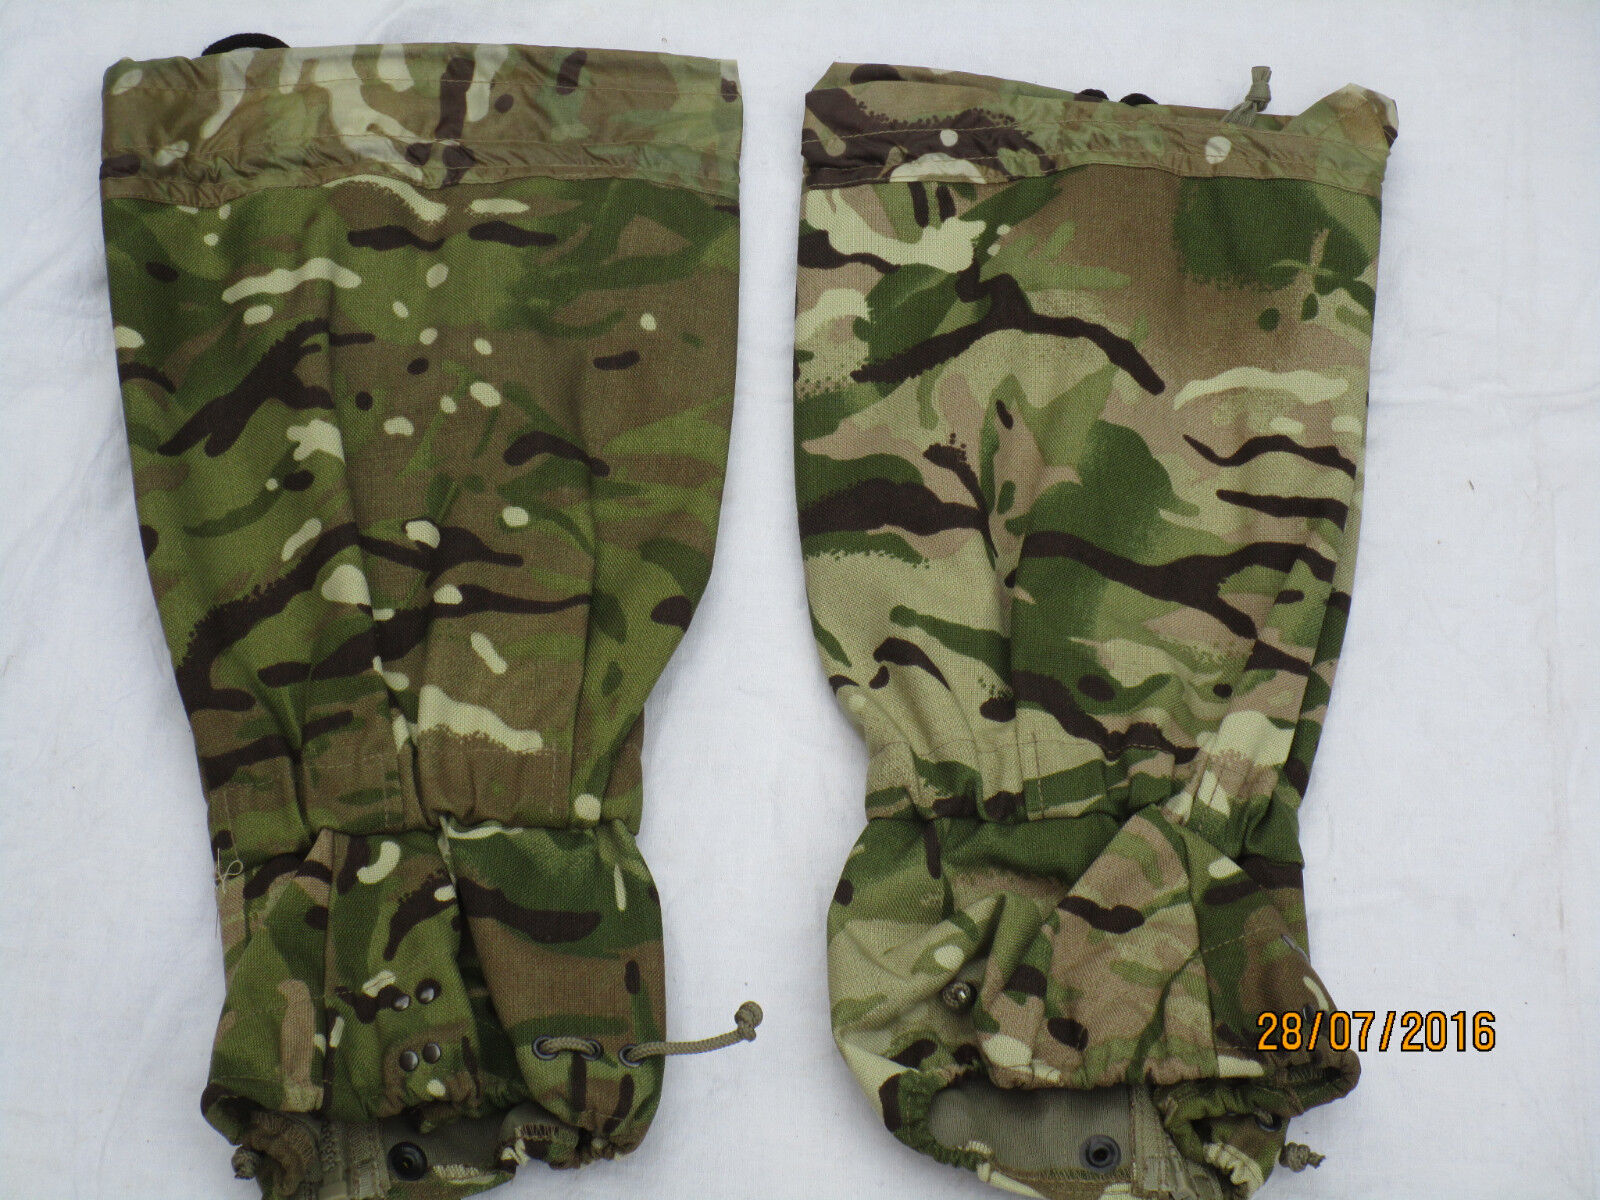 English Moisture Protection Puttees, Gaiters GS, MK2, Mtp 2015, Multicam, Size